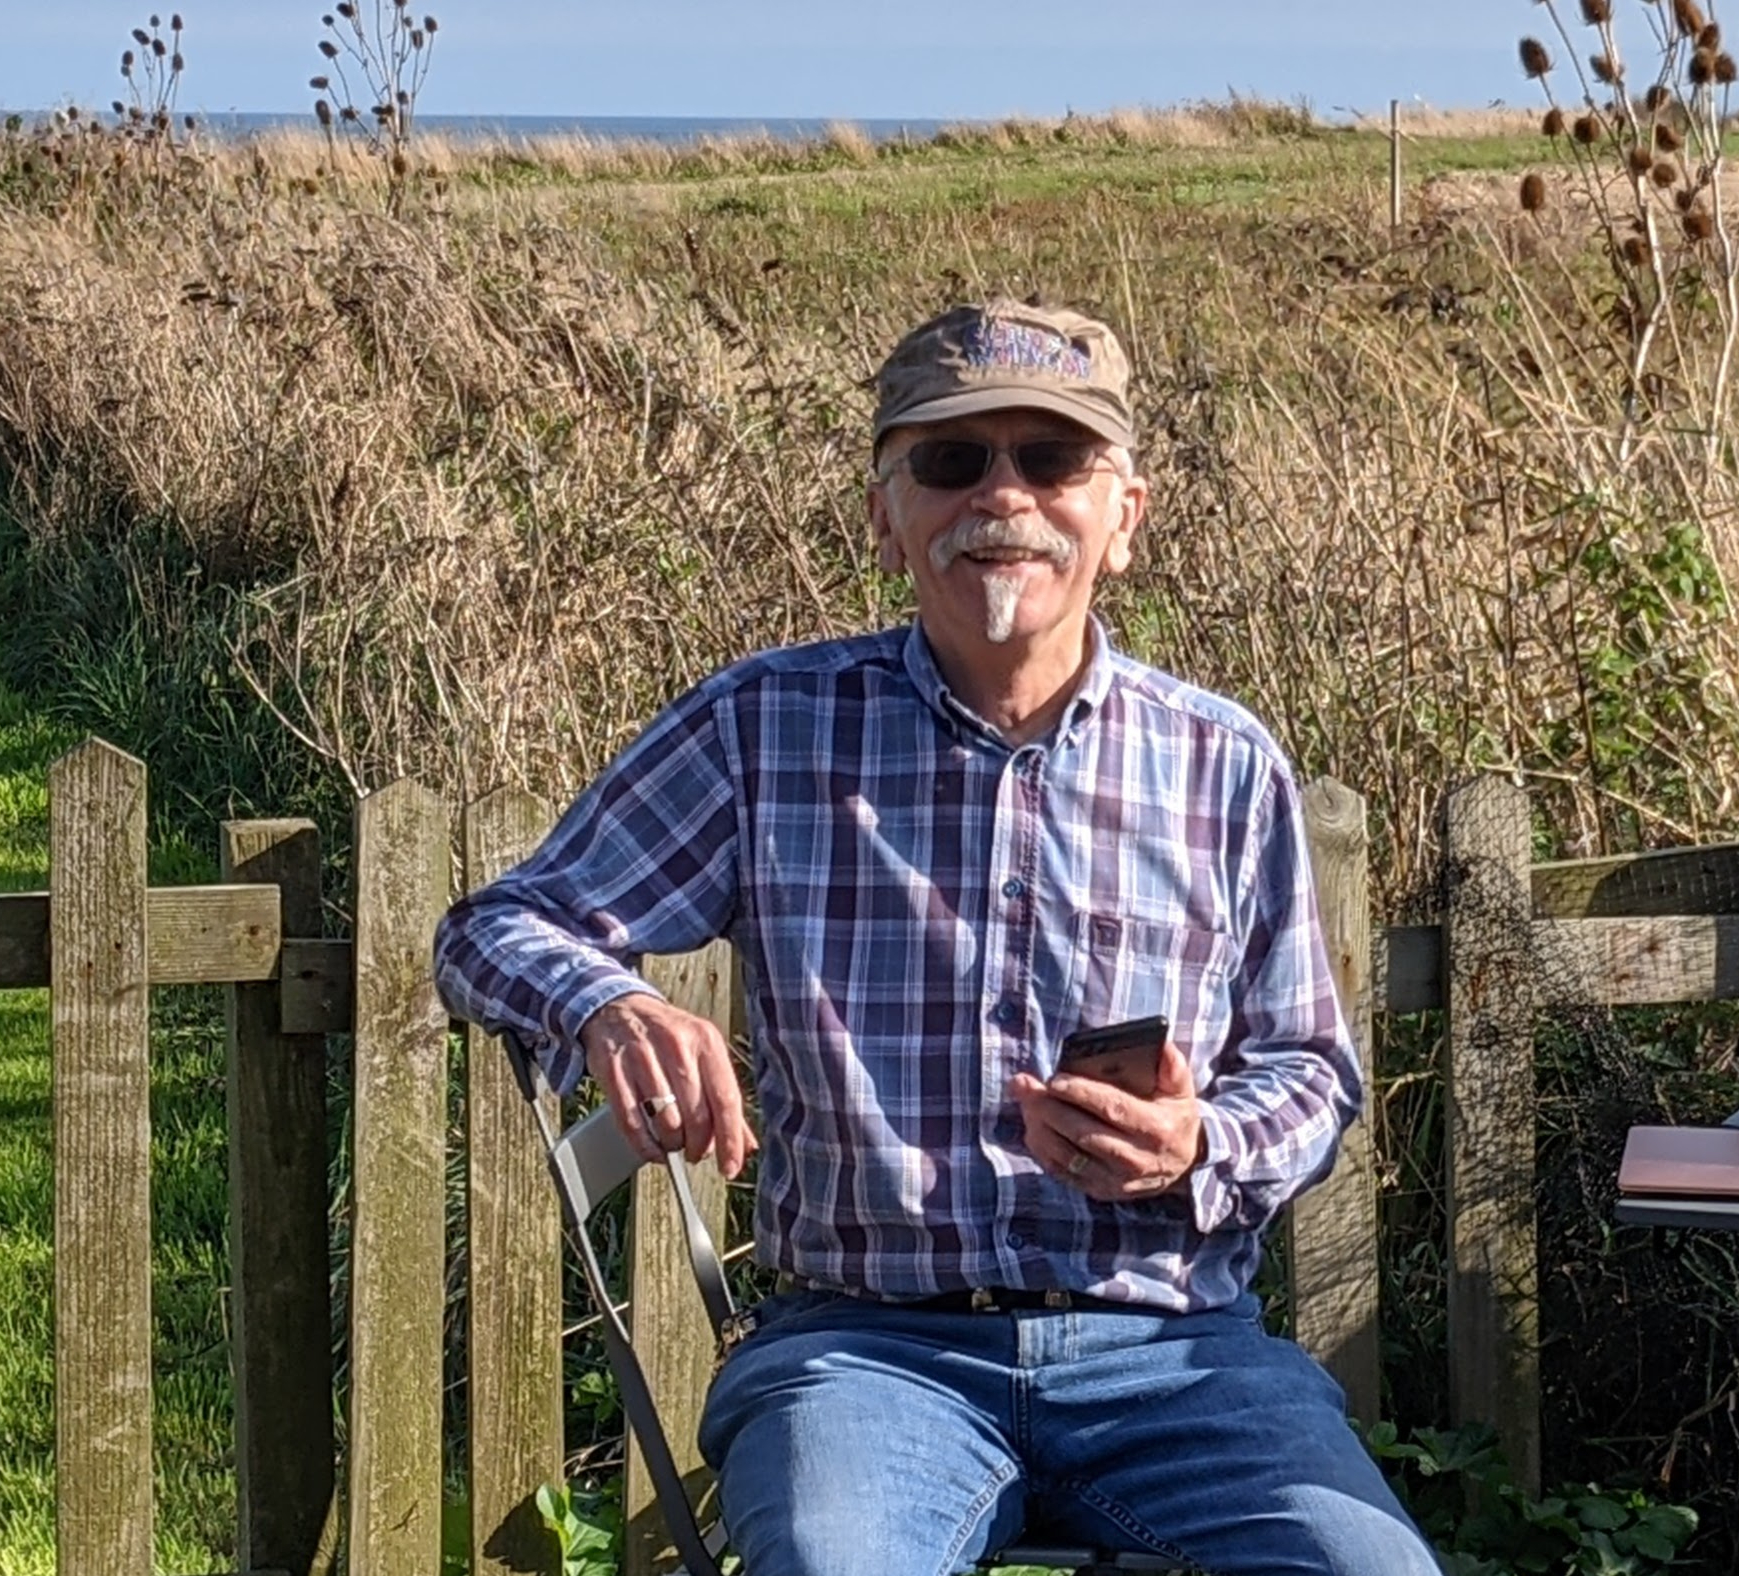 A photo of Steve sitting in a garden. There is a low wooden fence behind him and a field beyond that. You can see the sea in the background..